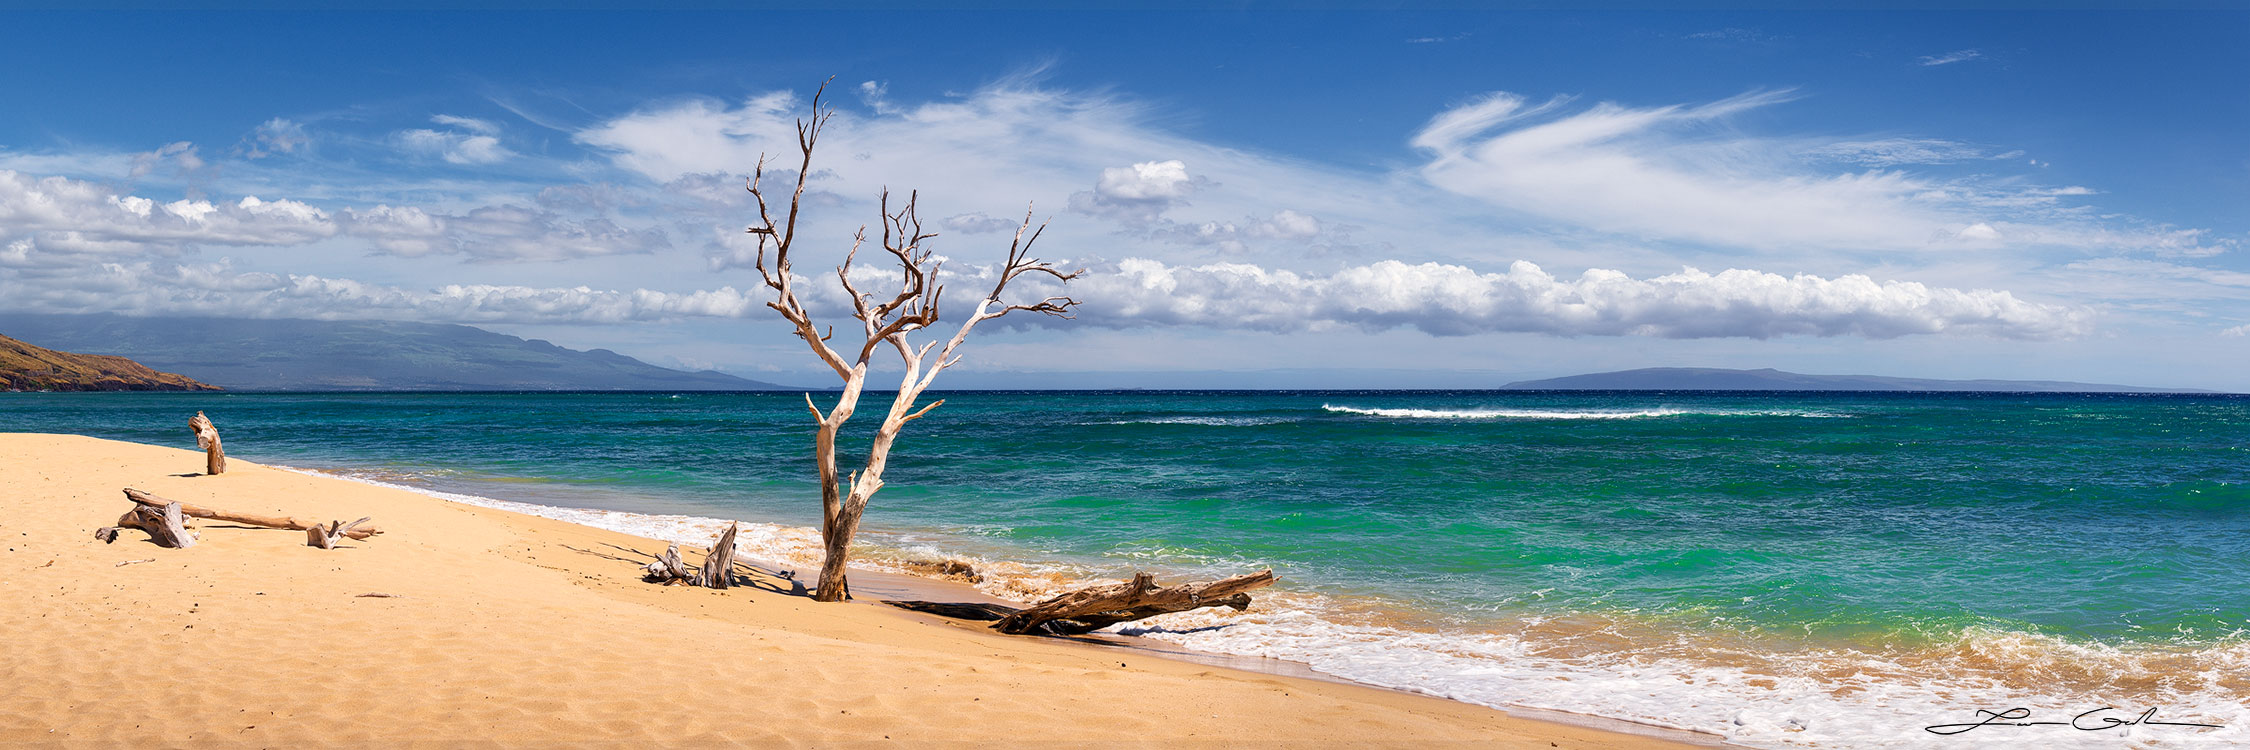 Experience the serene beauty of a beach in Maui, HI with turquoise ocean, golden sand, and tree - Gintchin Fine Art.